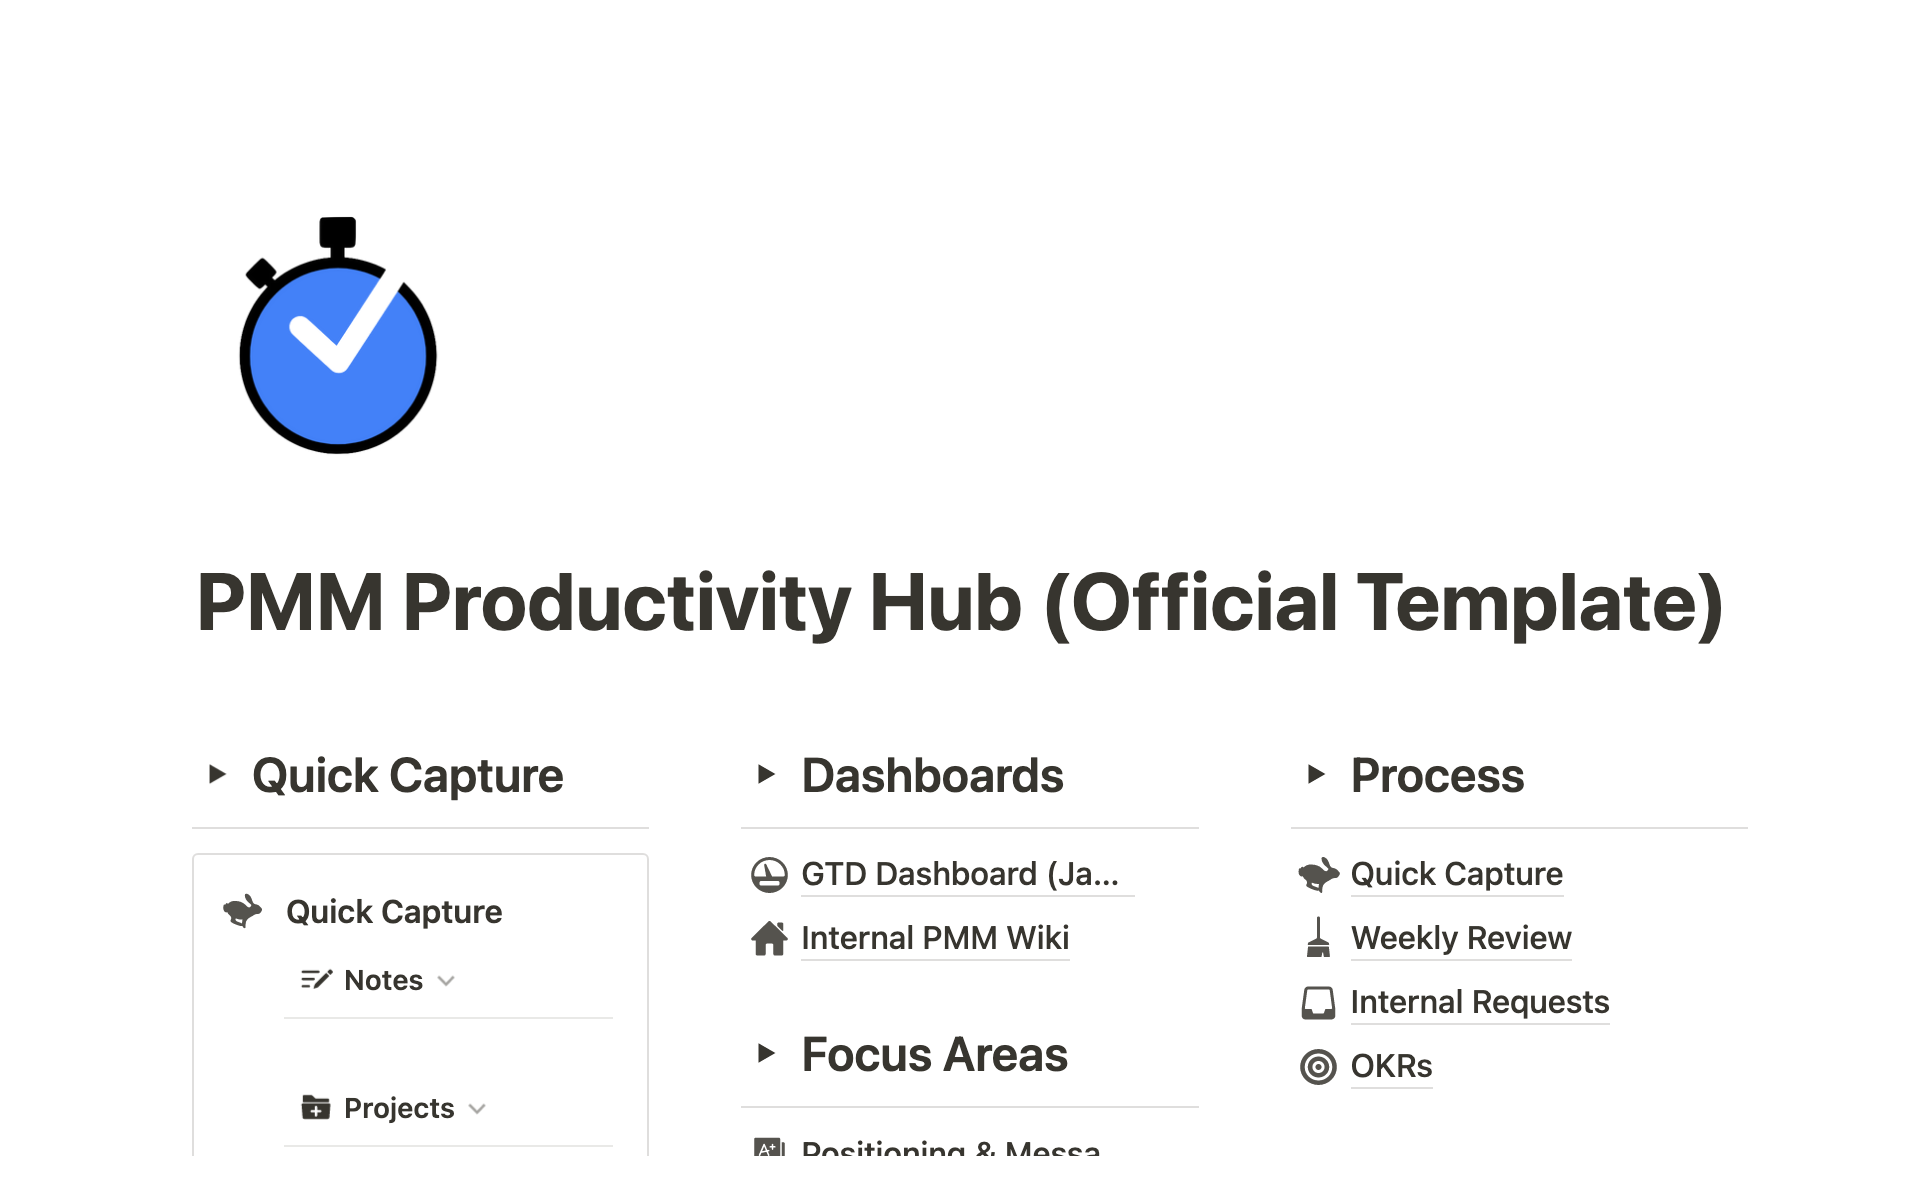 PMM Productivity Hub is a system built on Notion that helps small product marketing teams and solo PMMs organize their work, get more done, and communicate their value across their company.